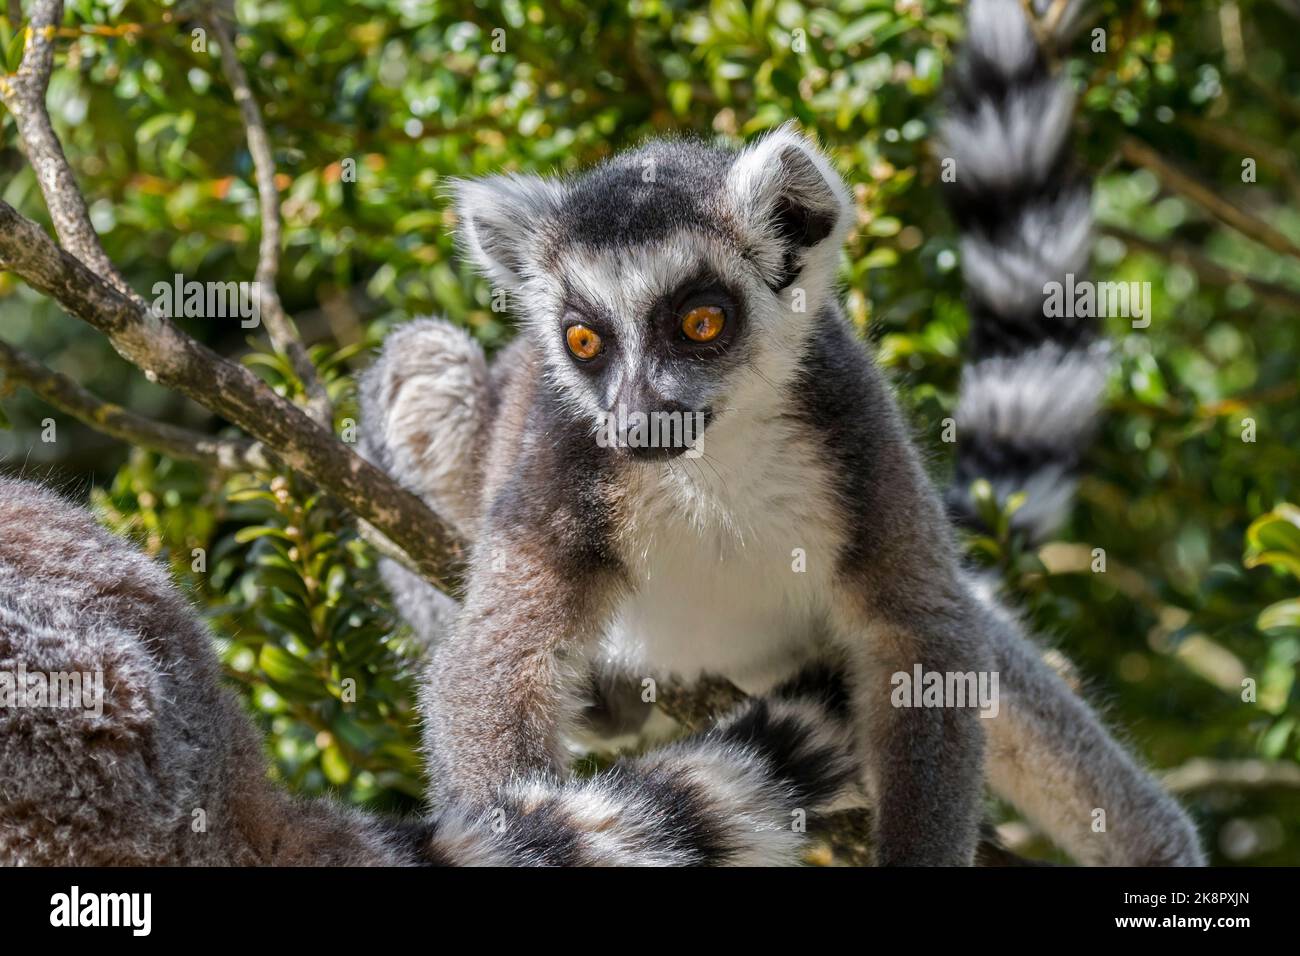 Ring-tailed lemurs (Lemur catta) foraging in tree, endangered primate endemic to the island of Madagascar, Africa Stock Photo